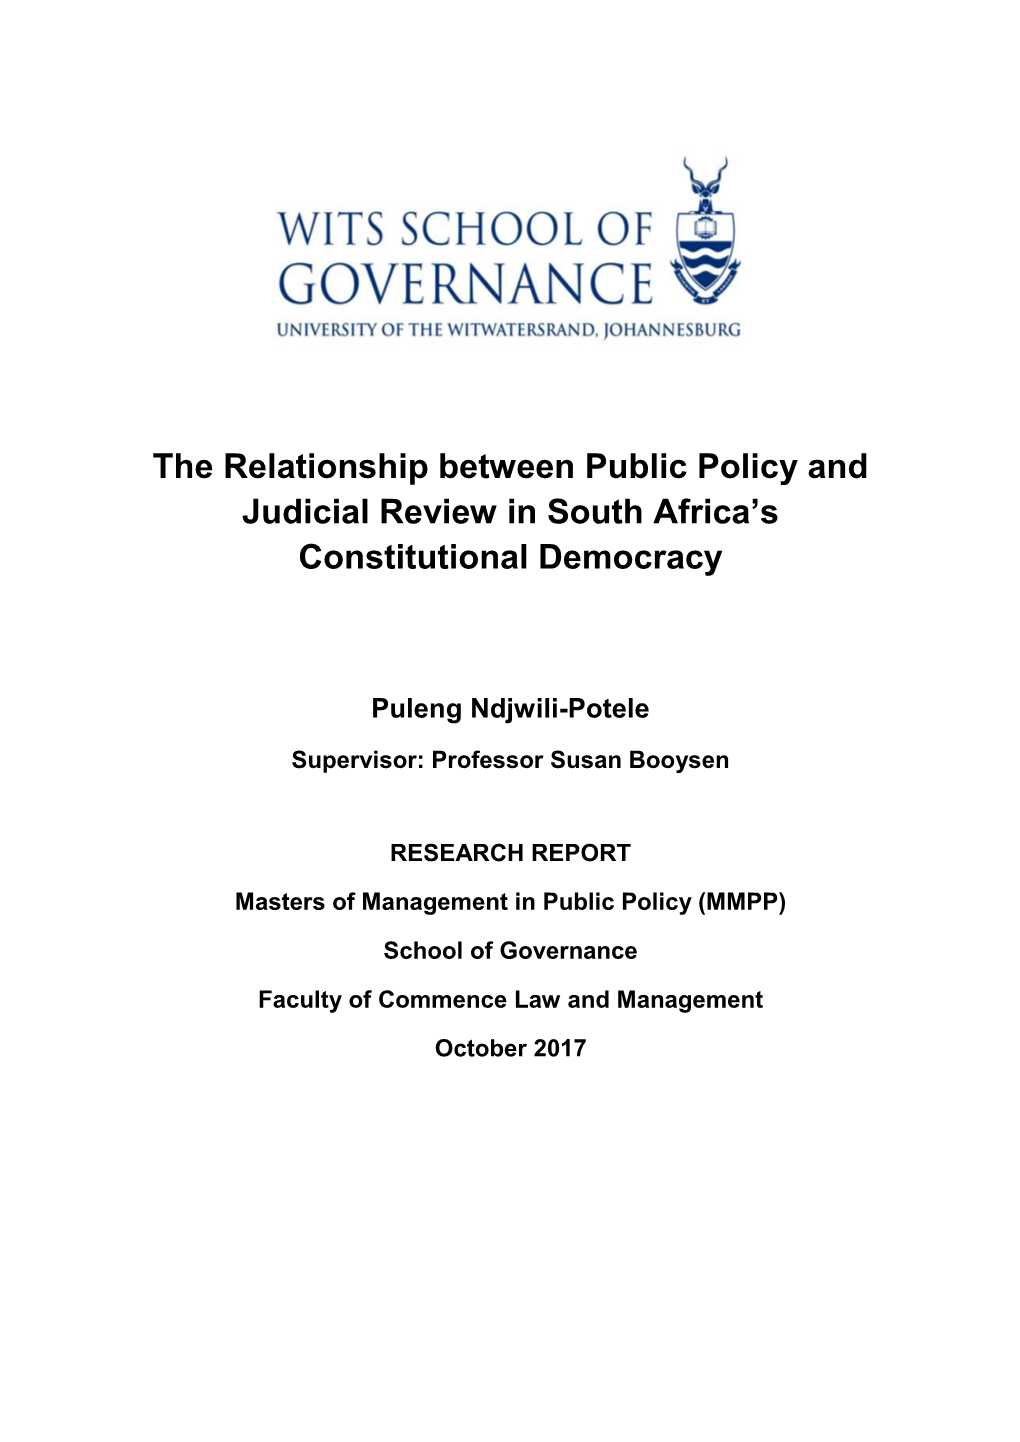 The Relationship Between Public Policy and Judicial Review in South Africa’S Constitutional Democracy